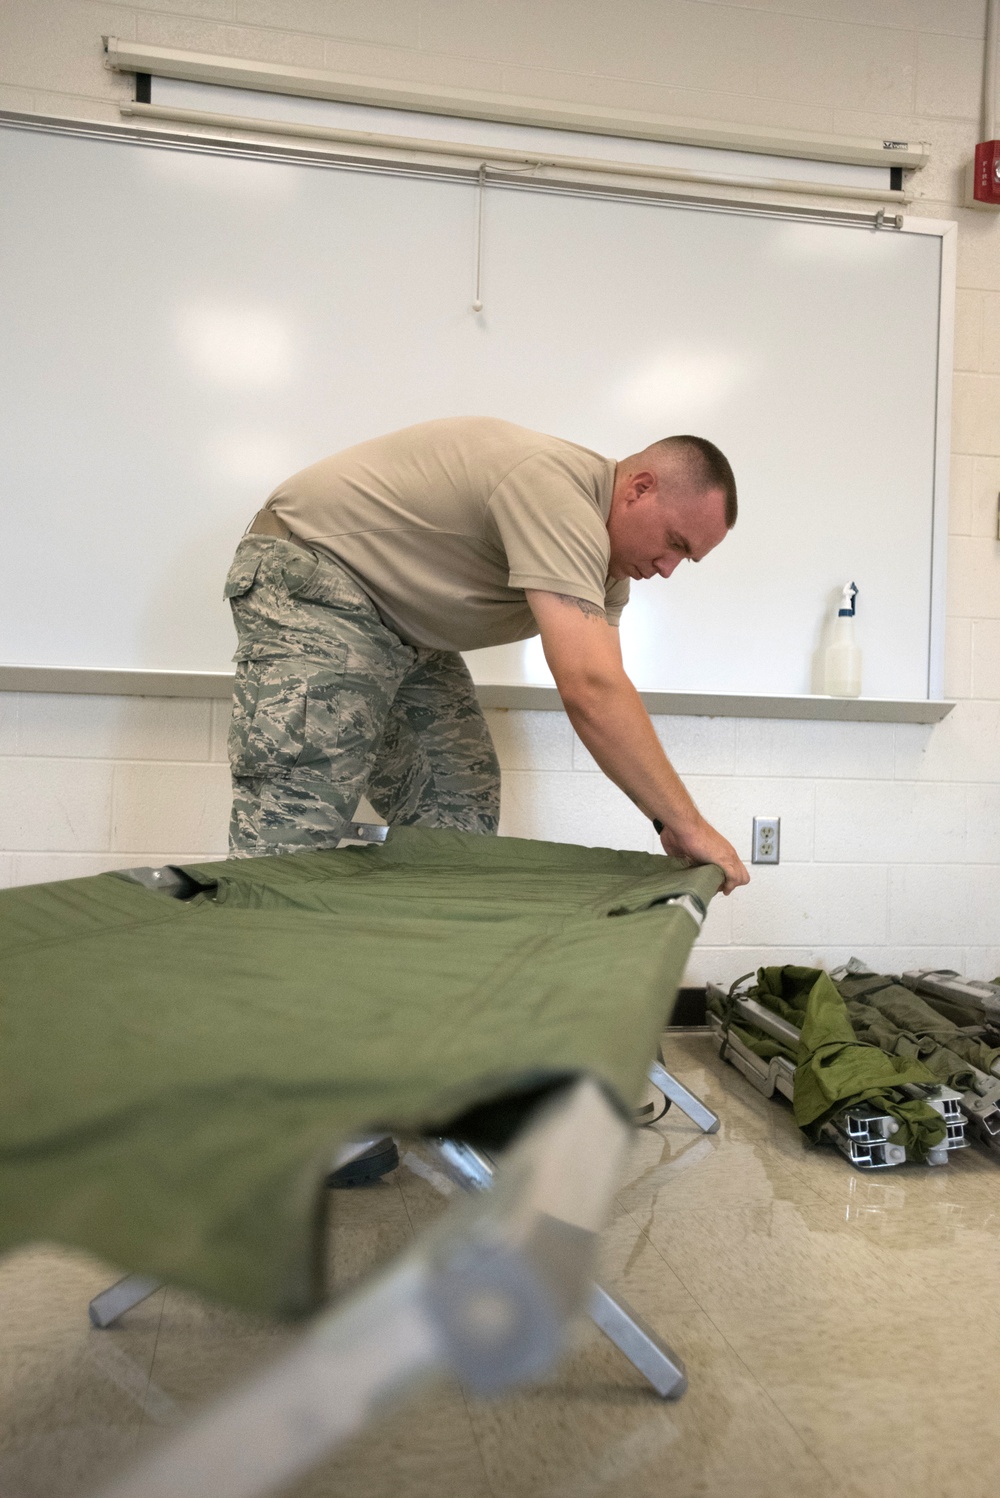 Kentucky Air Guard, U.S. Navy Reserves team with other services and Delta Regional Authority to offer health care at no cost in Western Kentucky